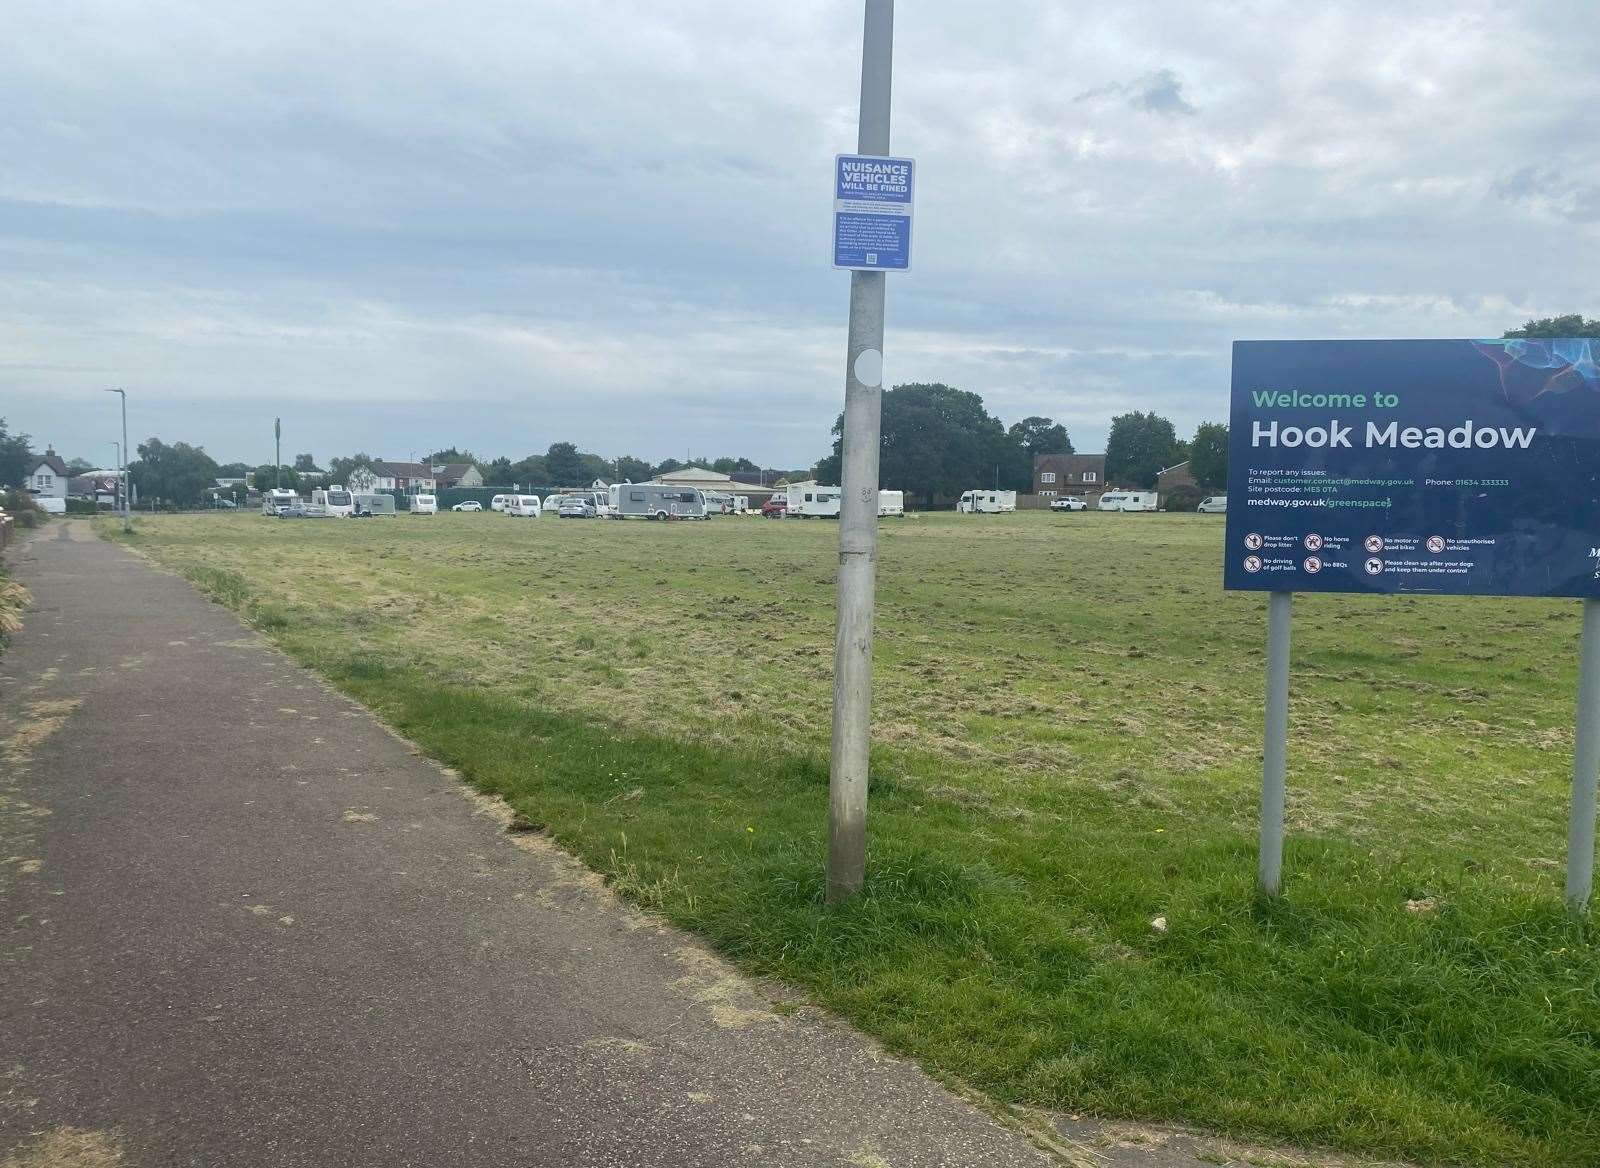 Hook Meadow is a popular place with dog walkers and children